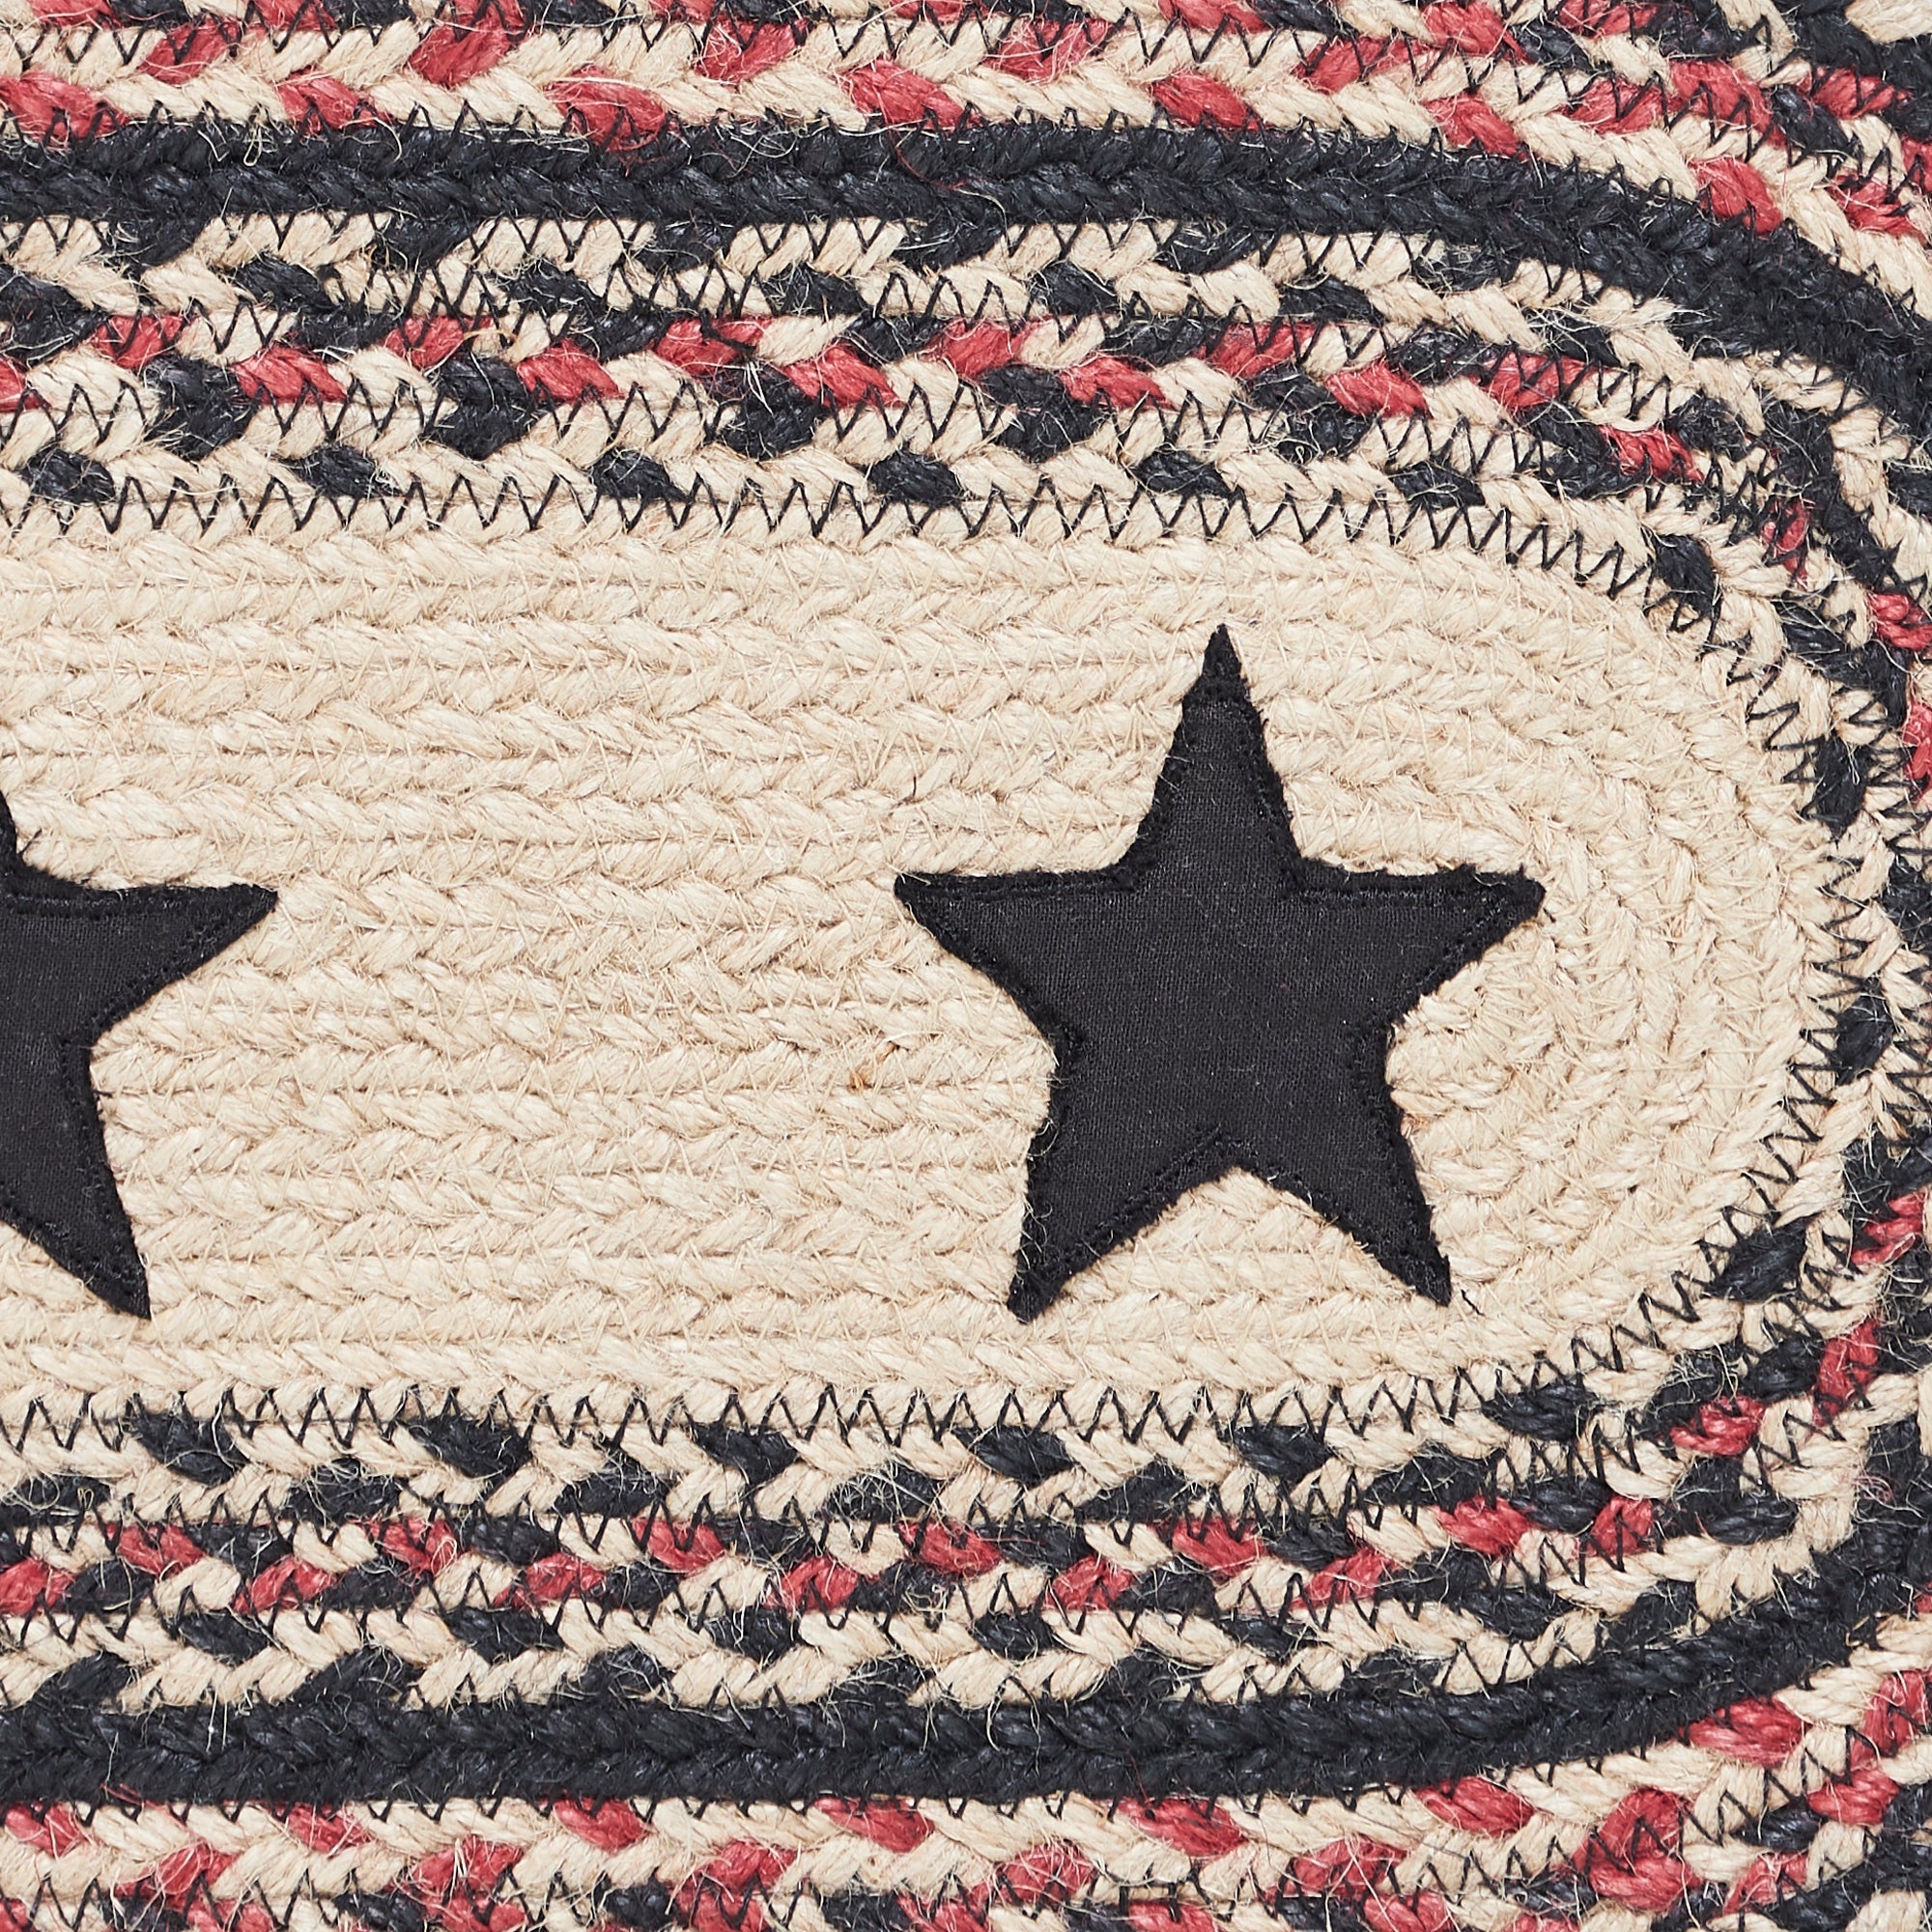 Colonial Star Jute Braided Oval Table Runner 8x24 VHC Brands